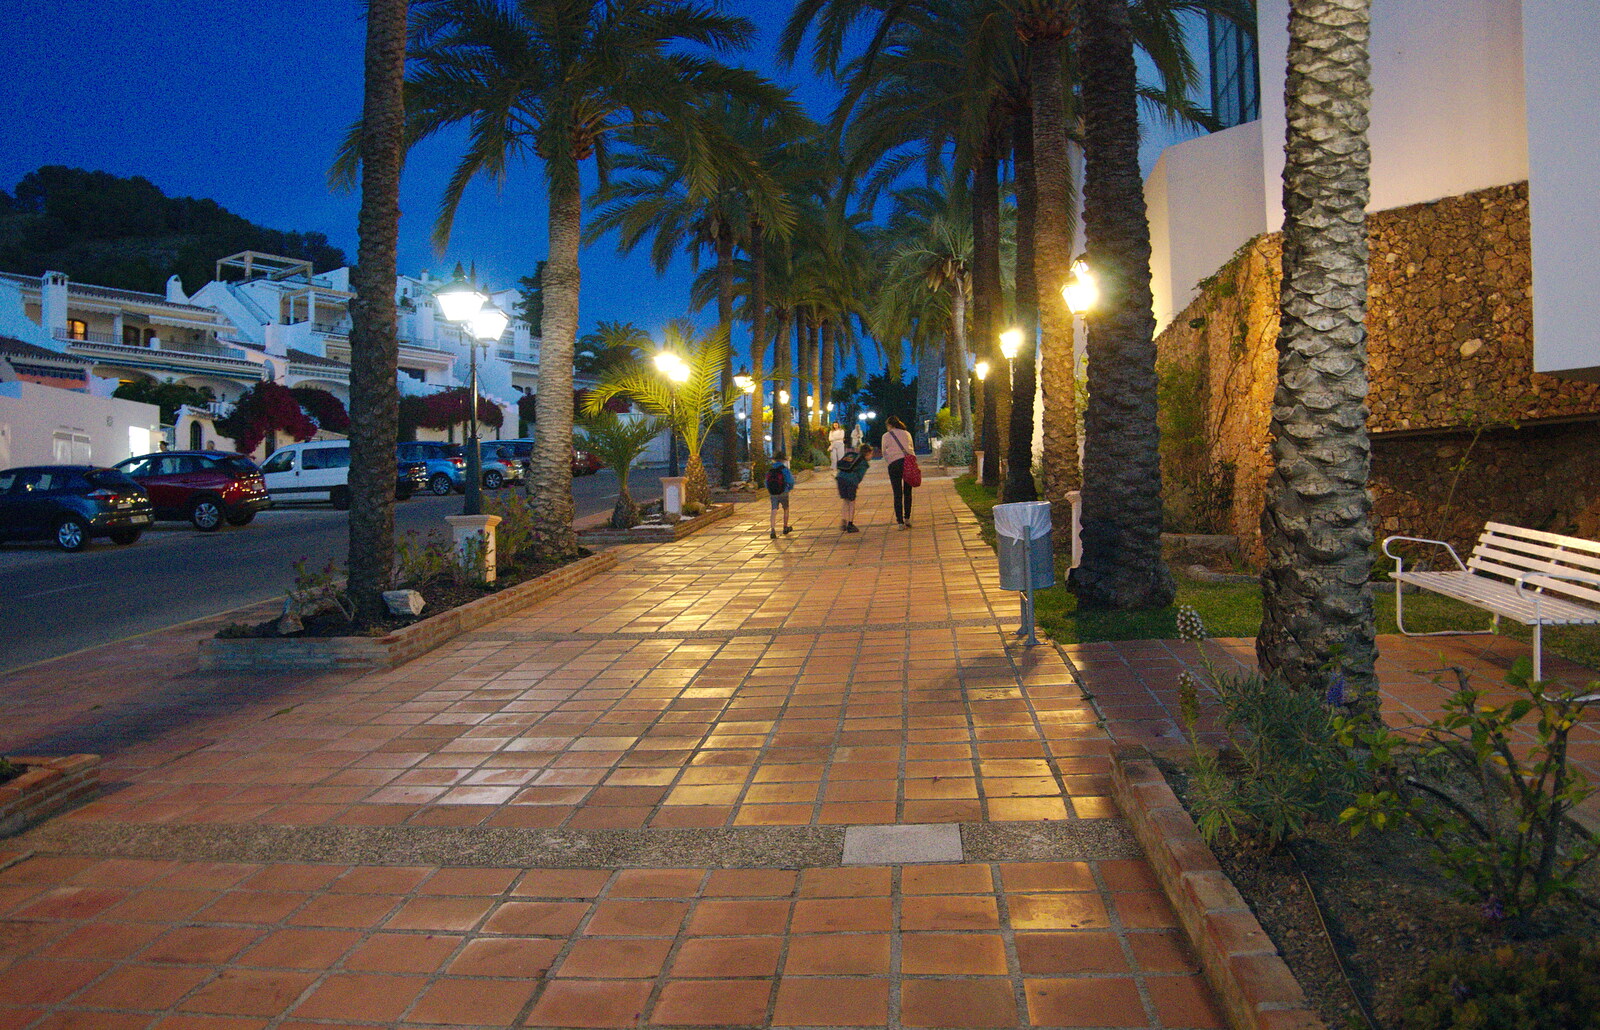 Walking up a terracotta pavement from A Holiday in Nerja, Andalusia, Spain - 15th April 2019